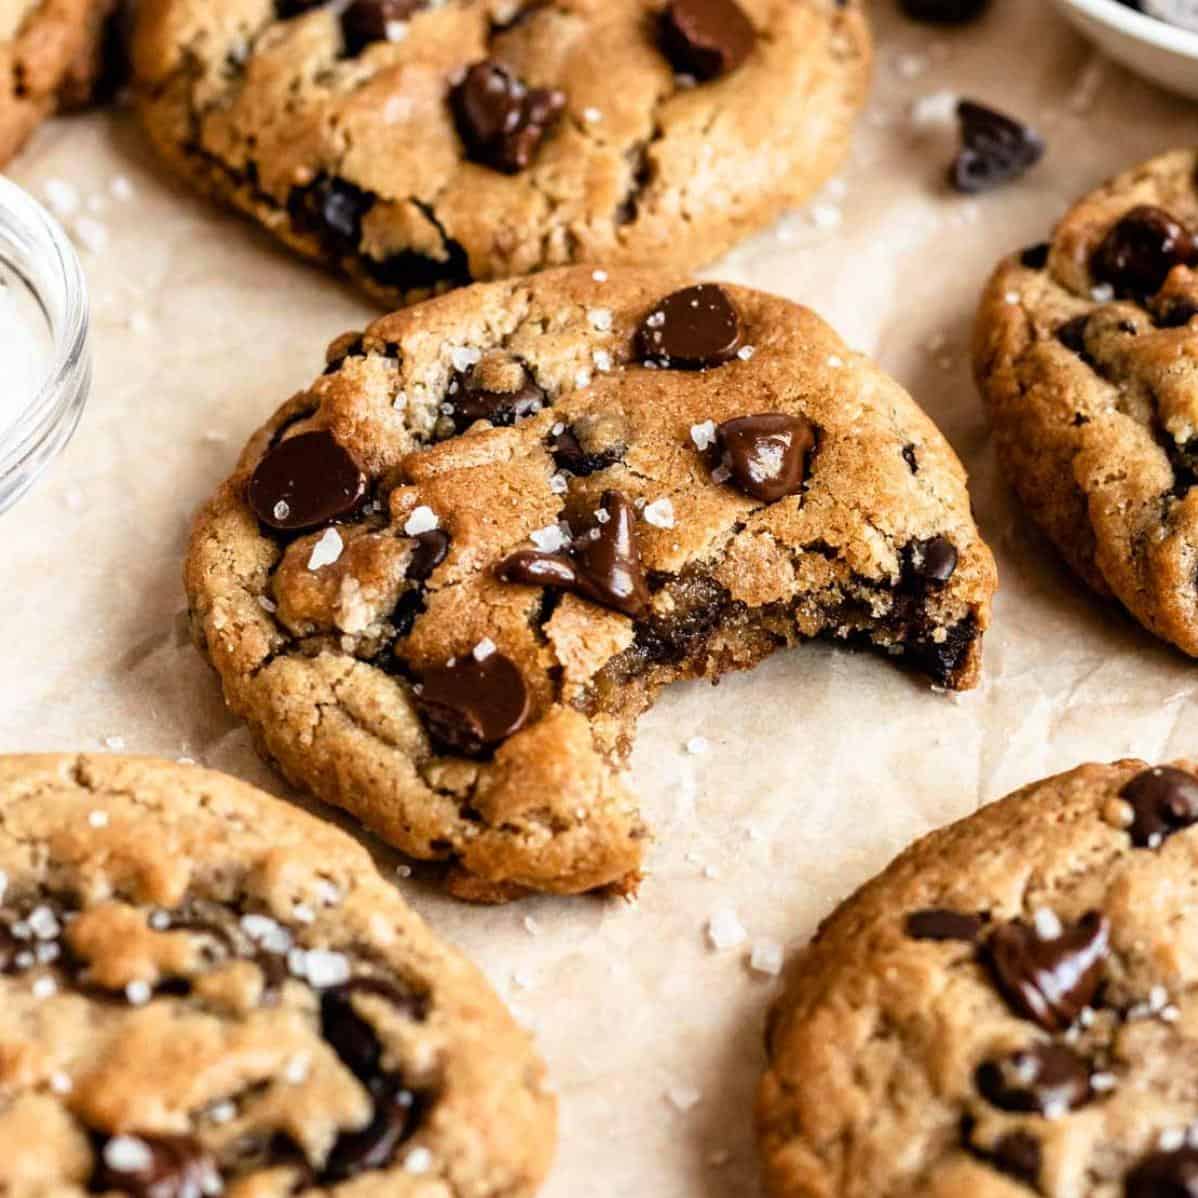  You can’t go wrong with classic chocolate chip cookies especially with this healthier version!